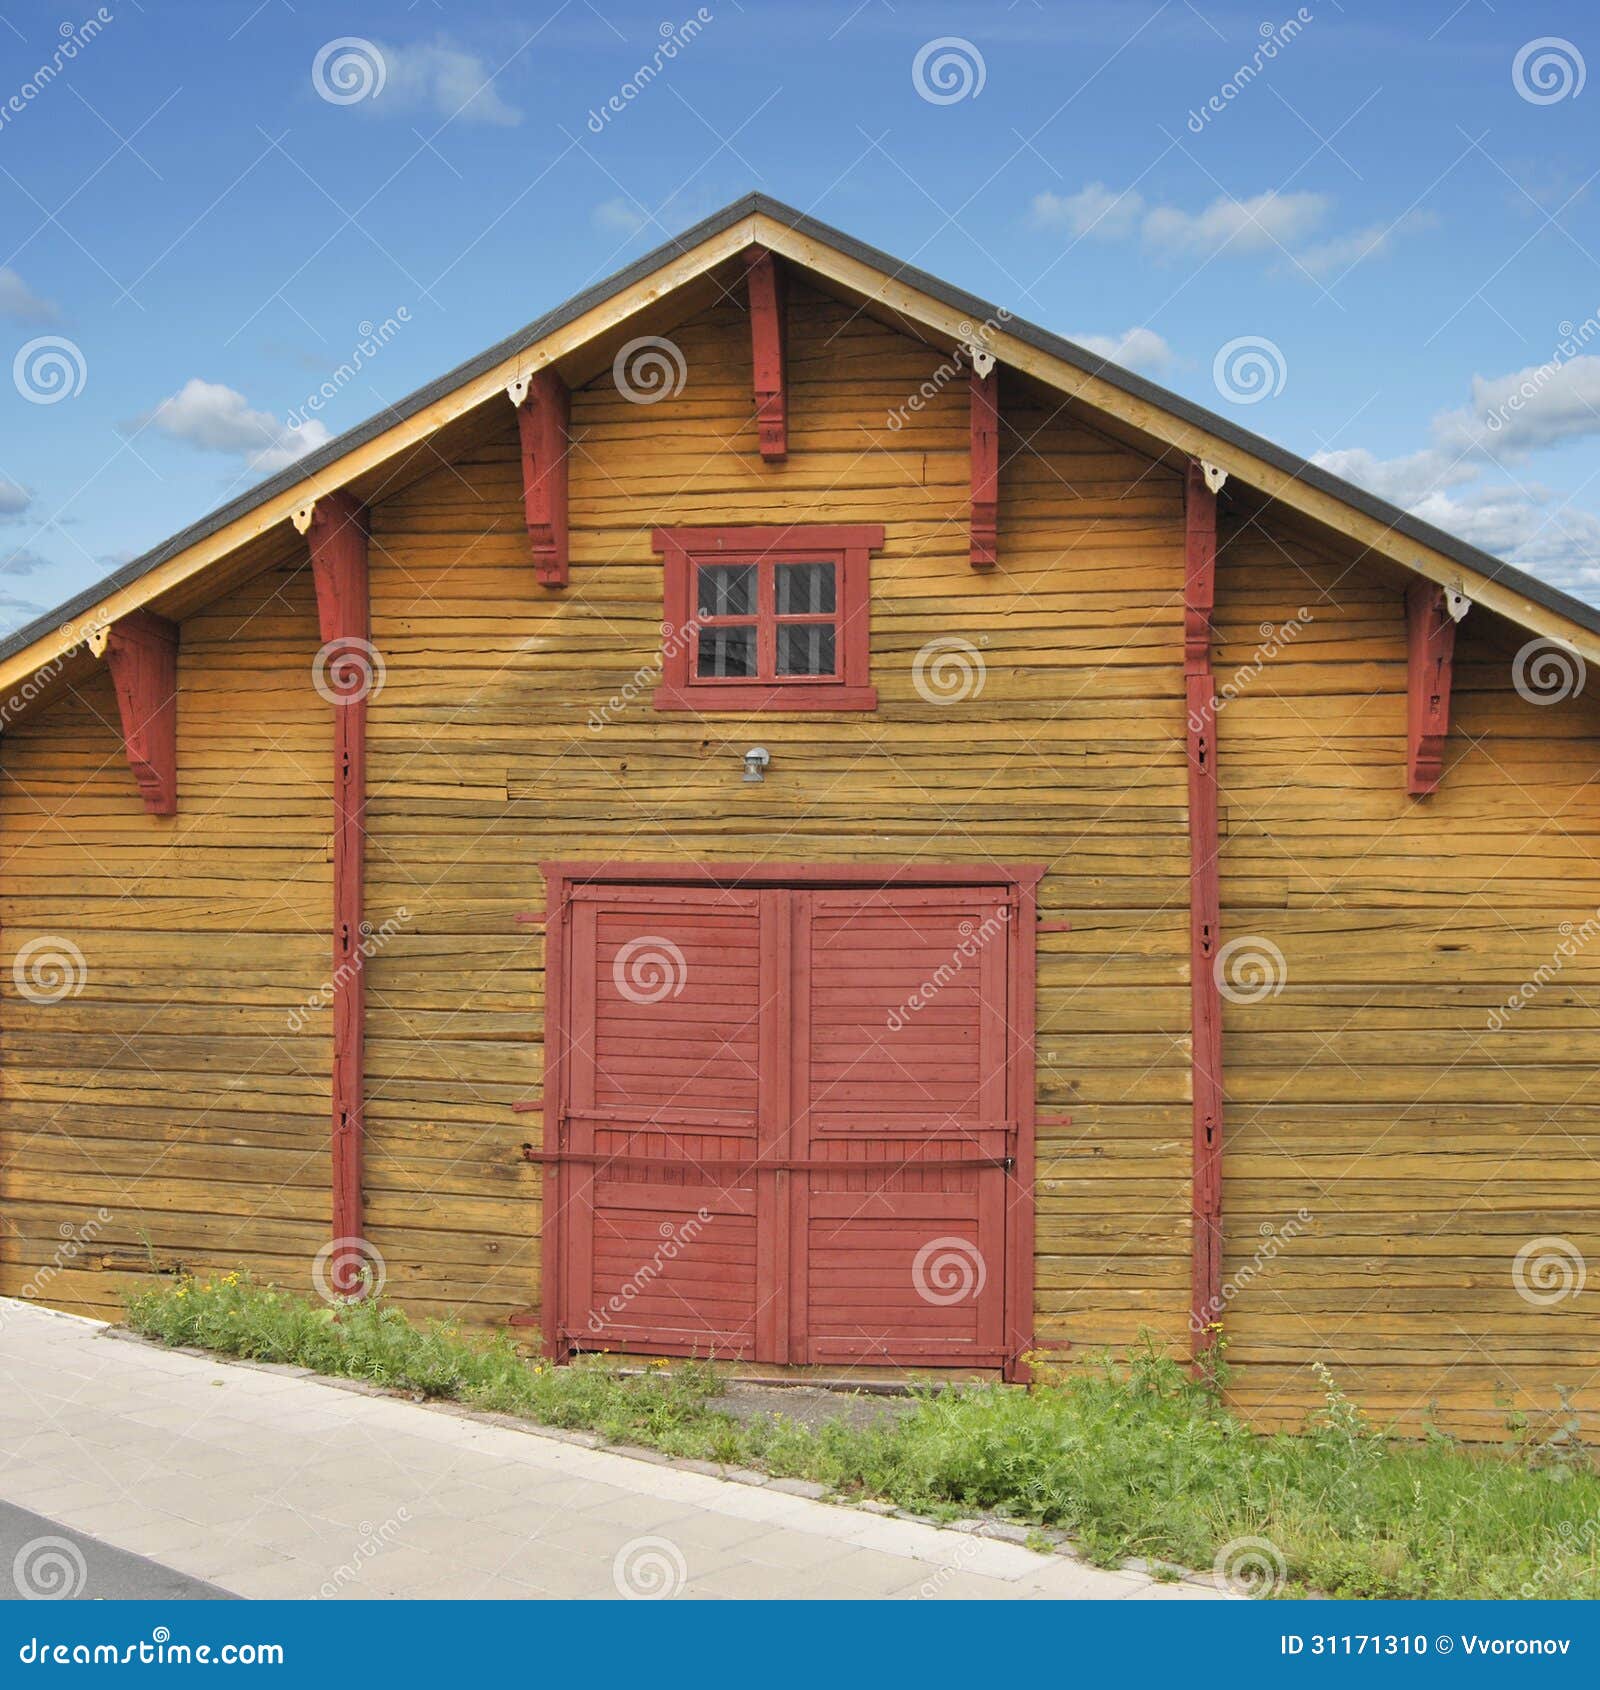 Ancient yellow wooden shed traditional for Western Finland.